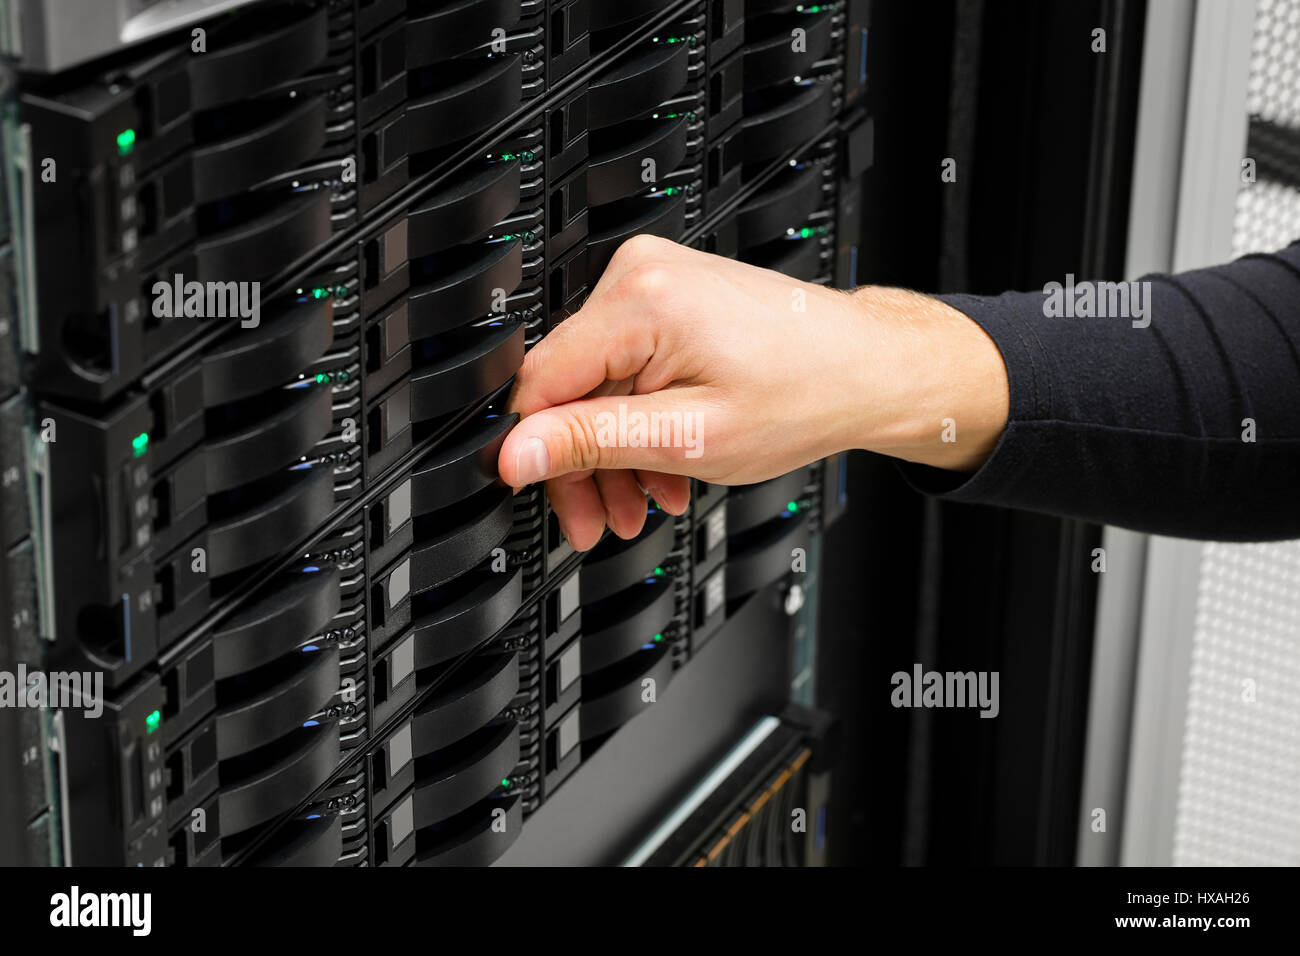 IT Engineer's Hand Replacing Hard Drive In Data Center Stock Photo